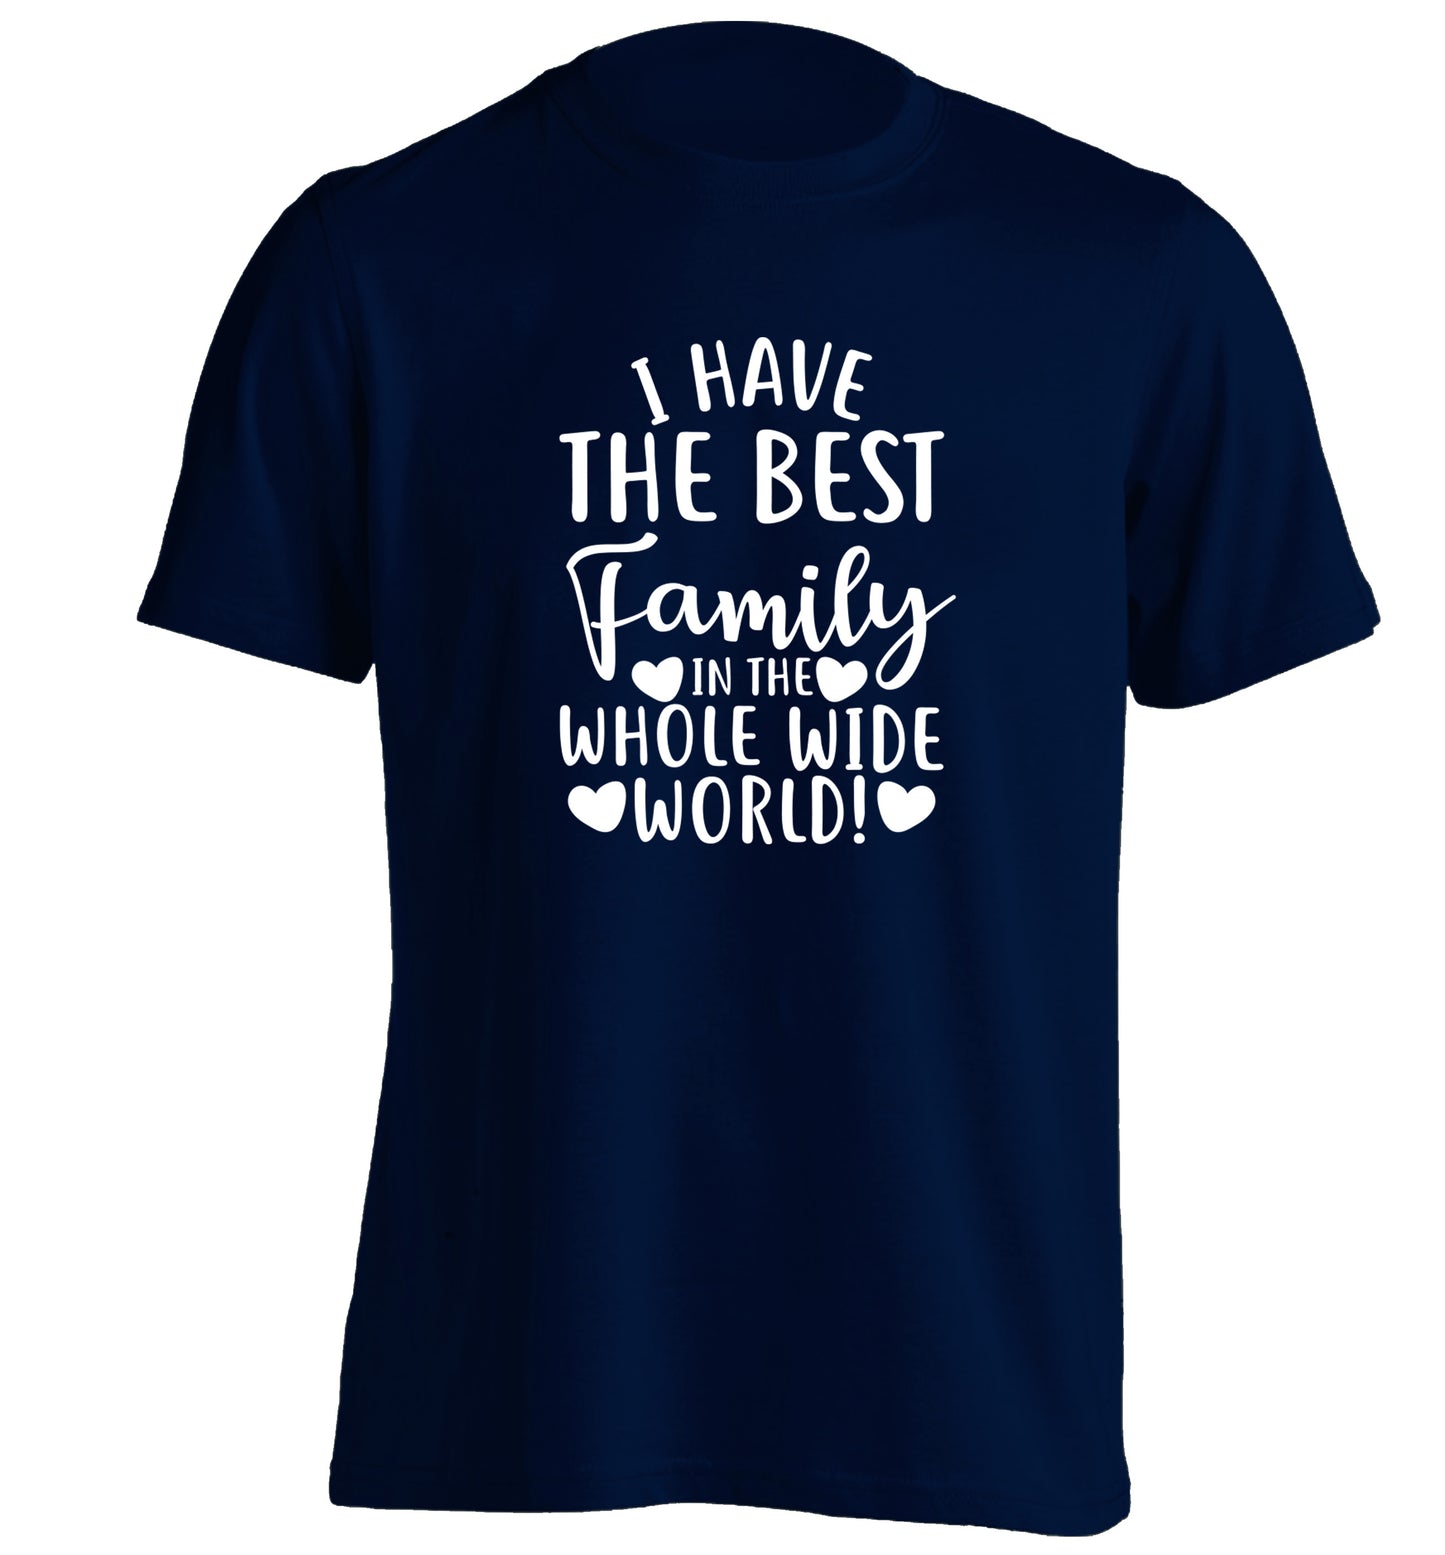 I have the best family in the whole wide world! adults unisex navy Tshirt 2XL